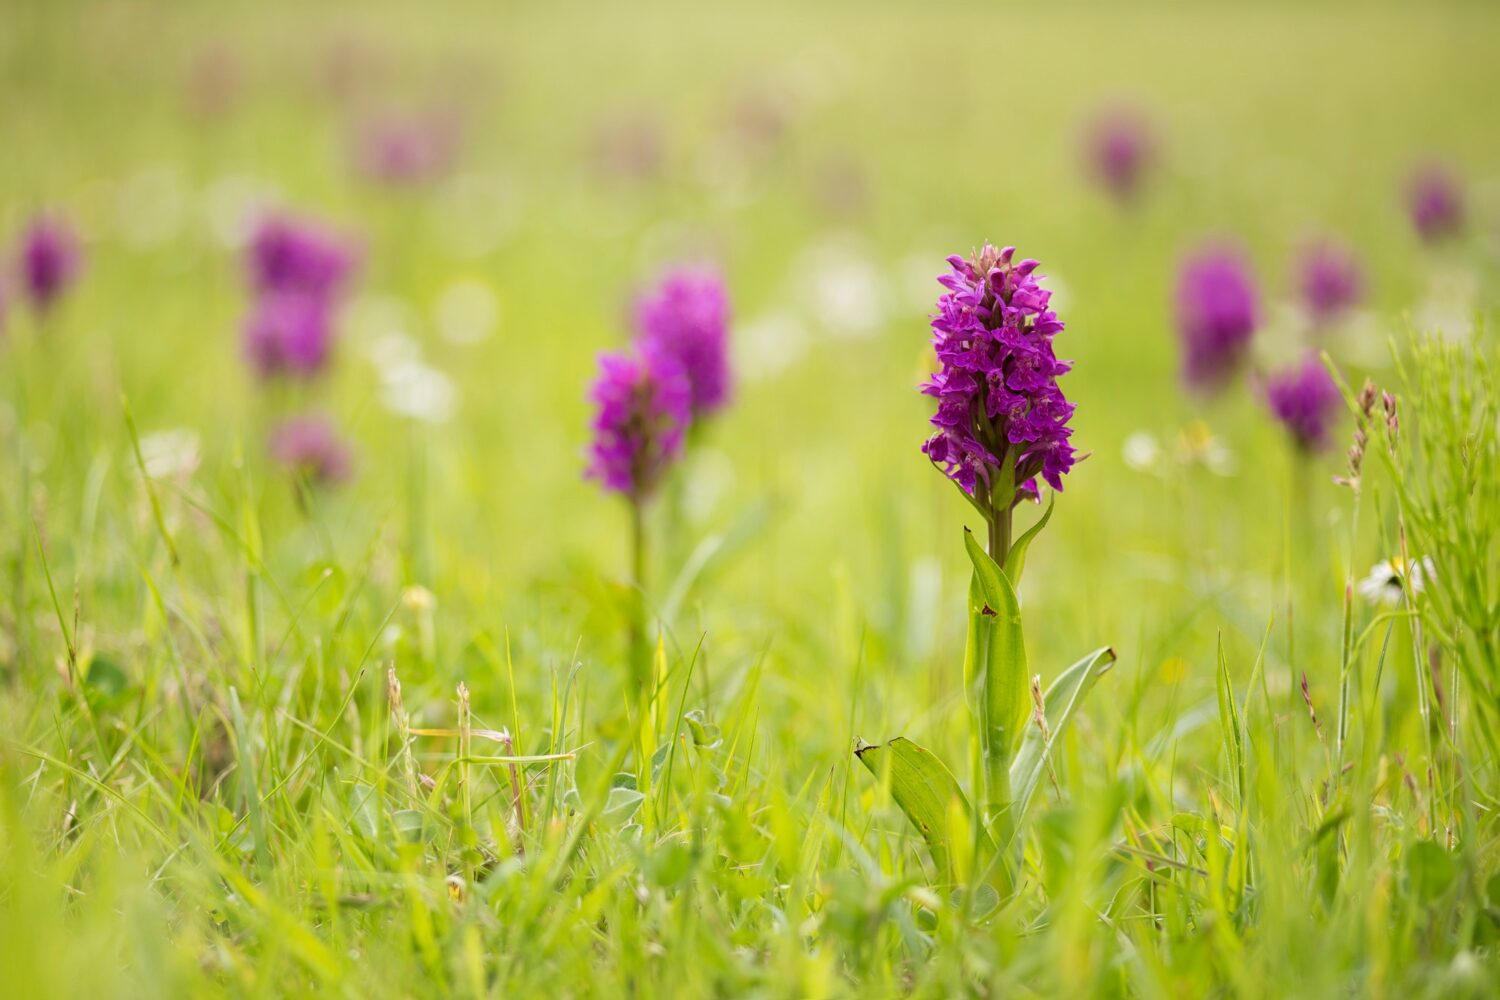 Northern Marsh Orchids